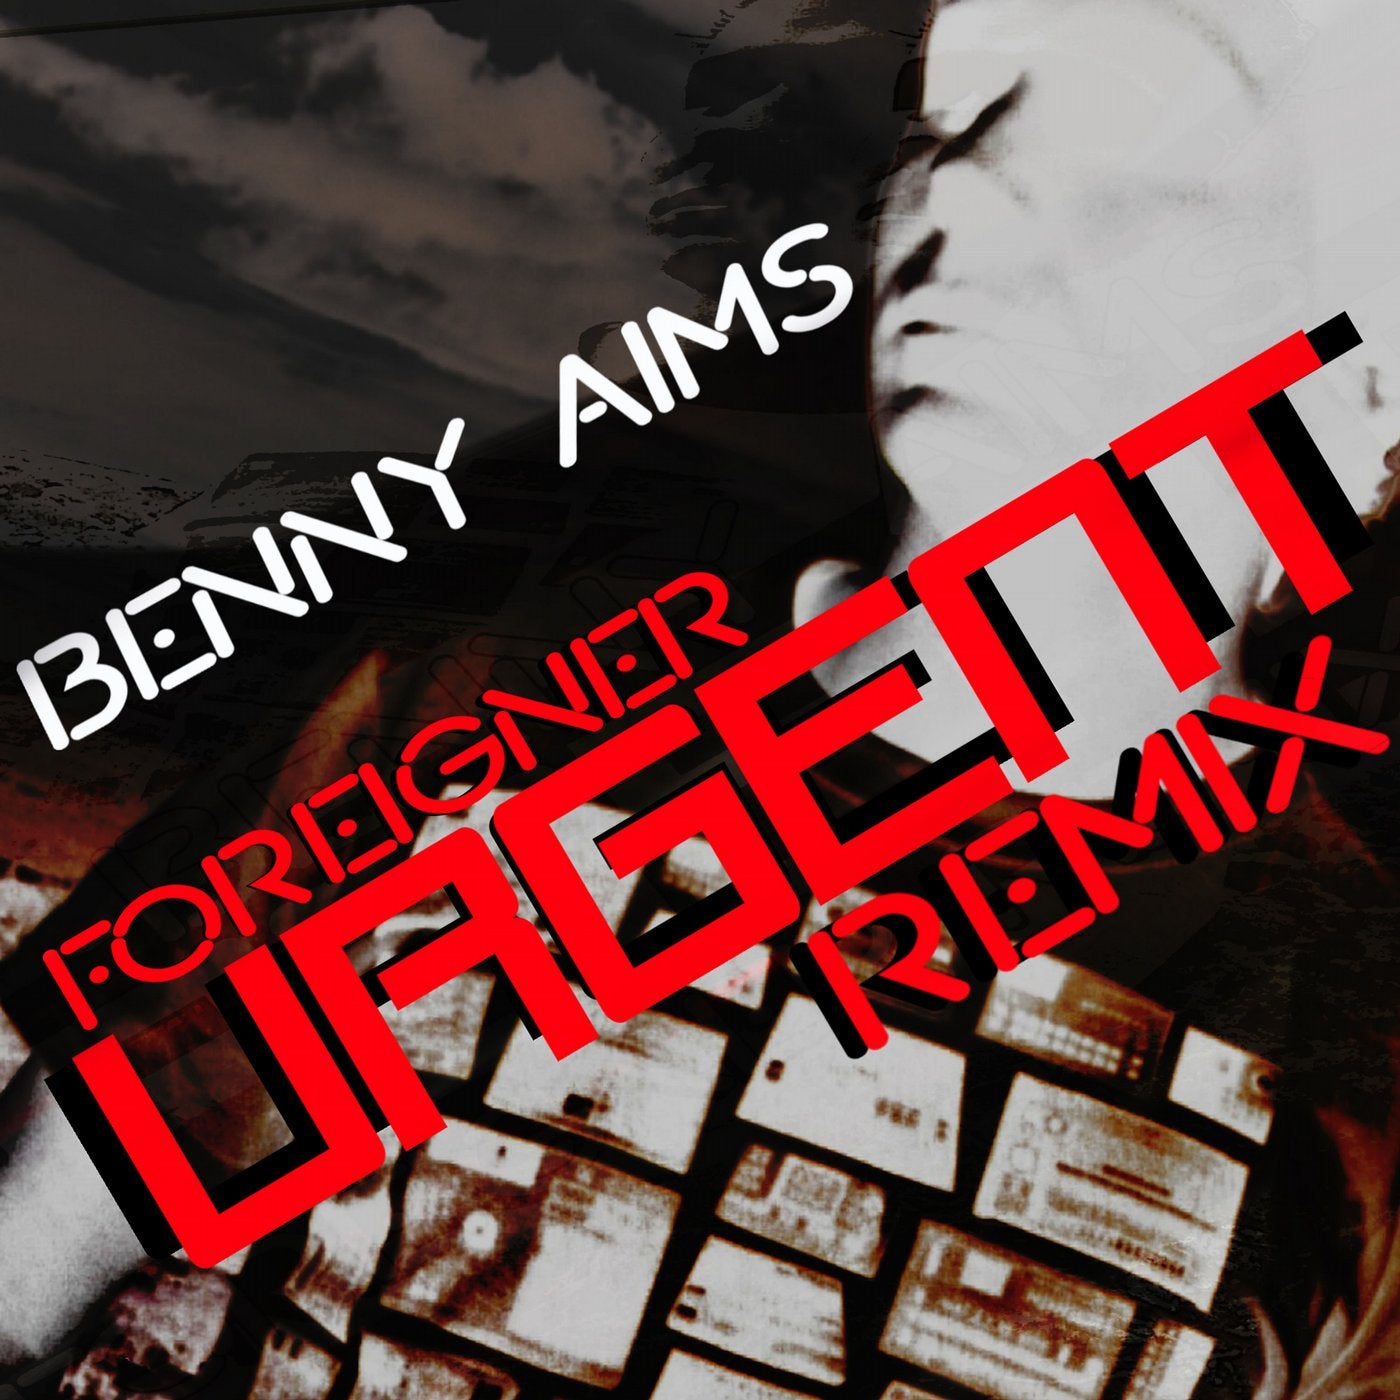 Urgent (Benny Aims Remix of Foreigner)